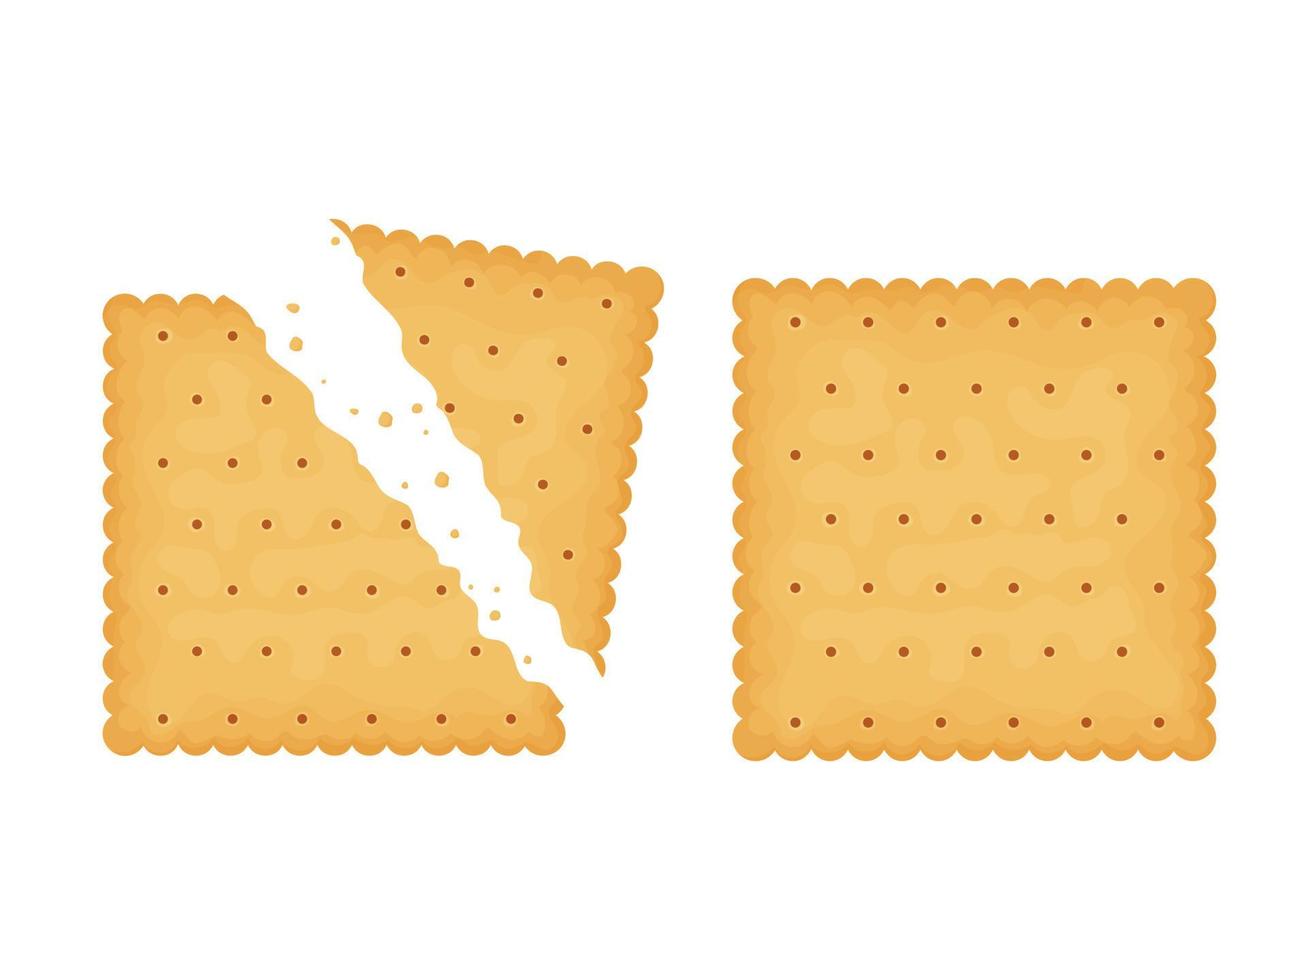 Square crackers. Two crackers. Illustration of food, snacks. Healthy snack. vector